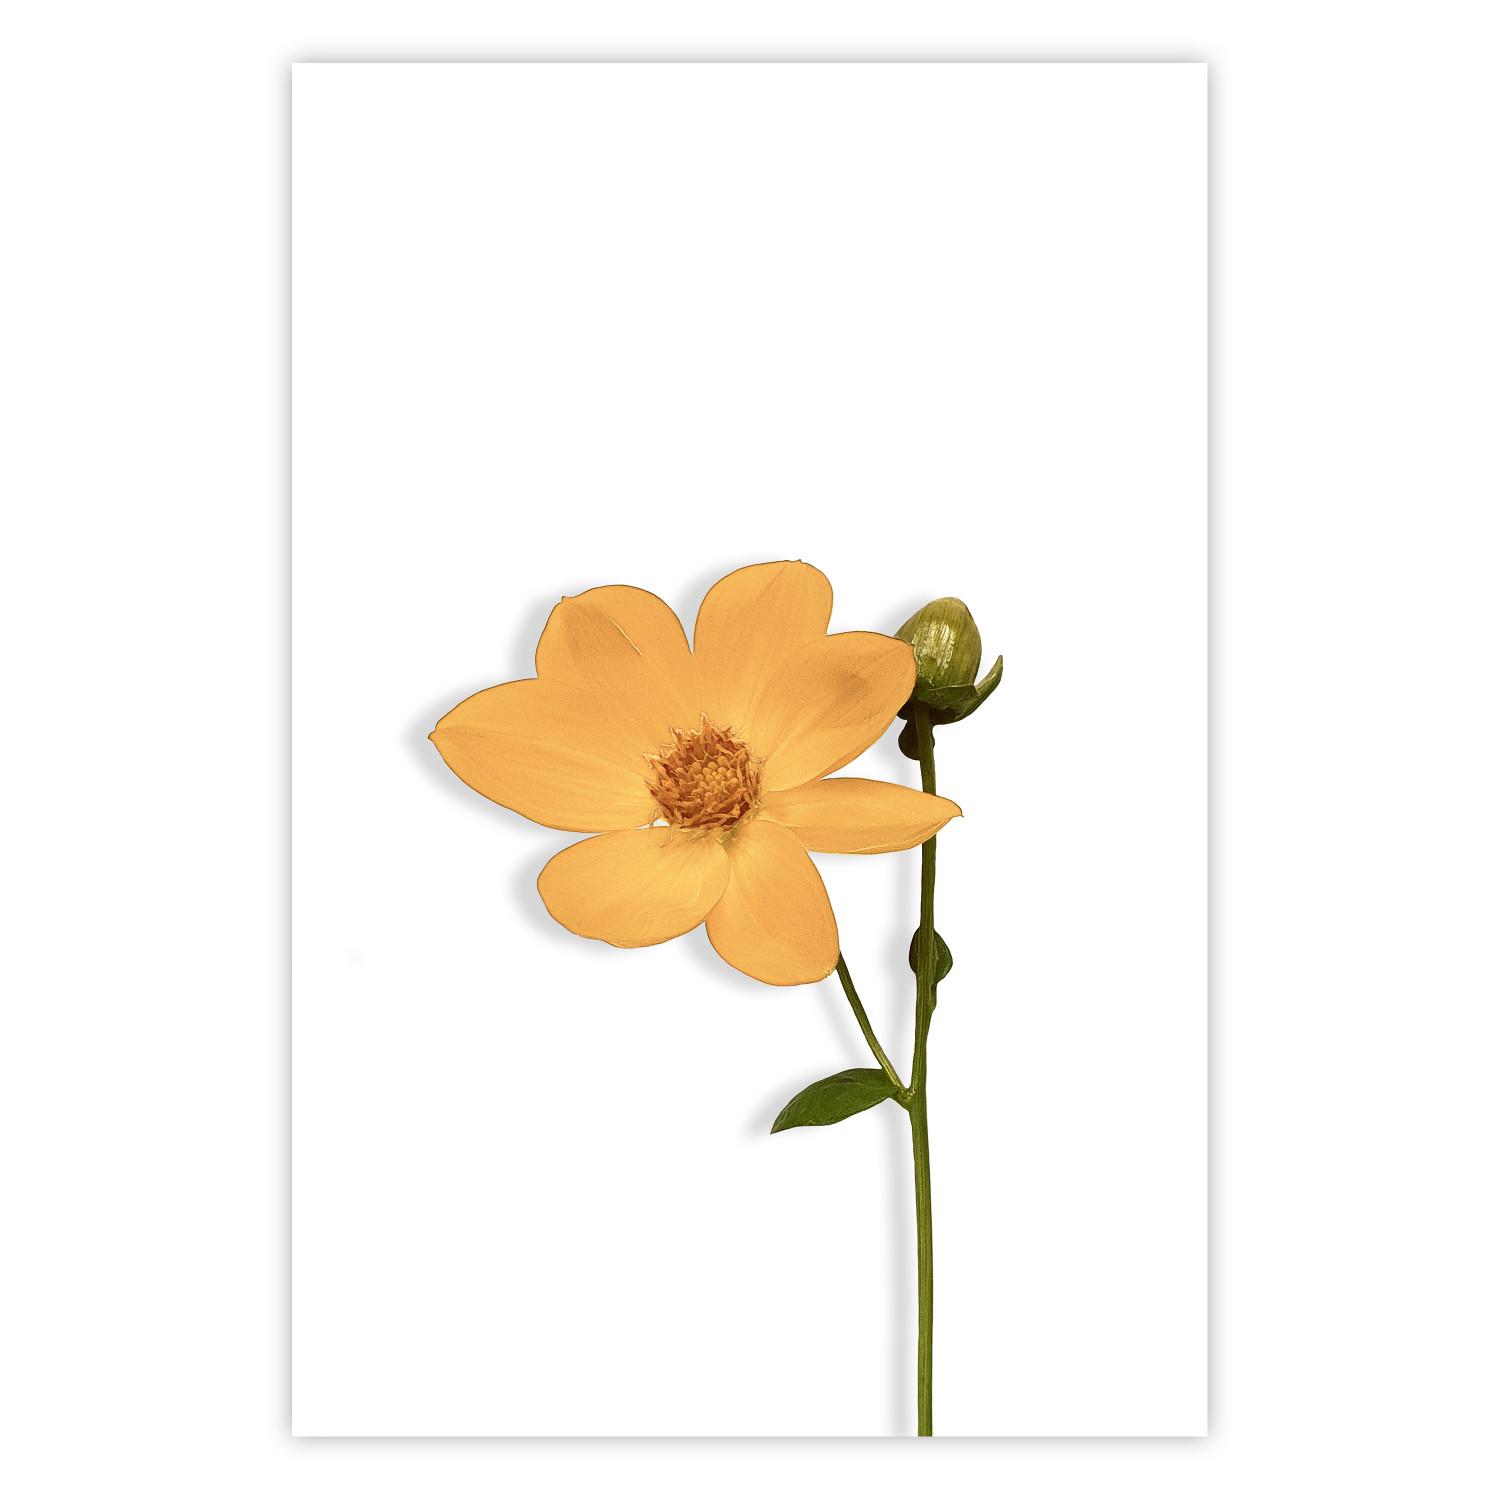 Poster Lovely Flower - a plant with a yellow flower on a uniform white background